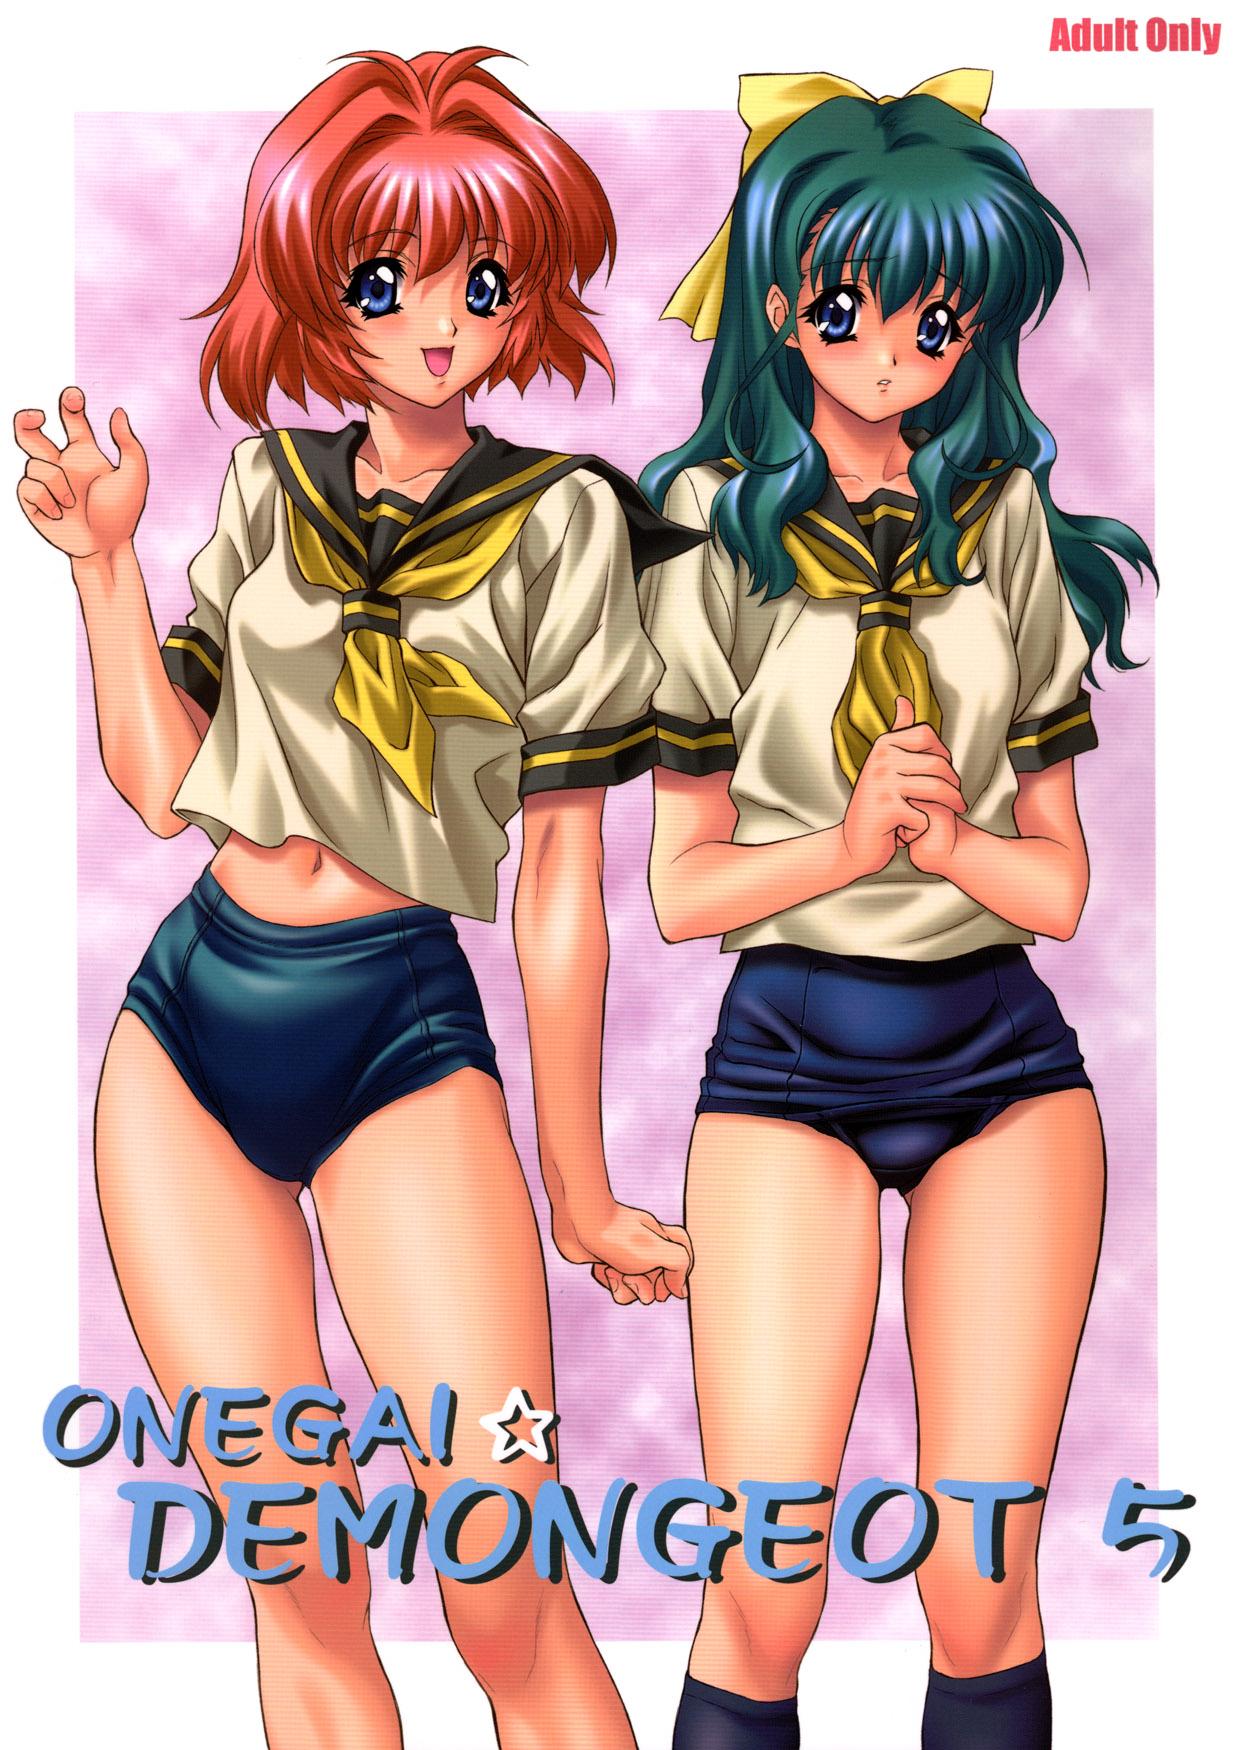 Tiny Demongeot 5 - Onegai twins Celebrity Nudes - Picture 1